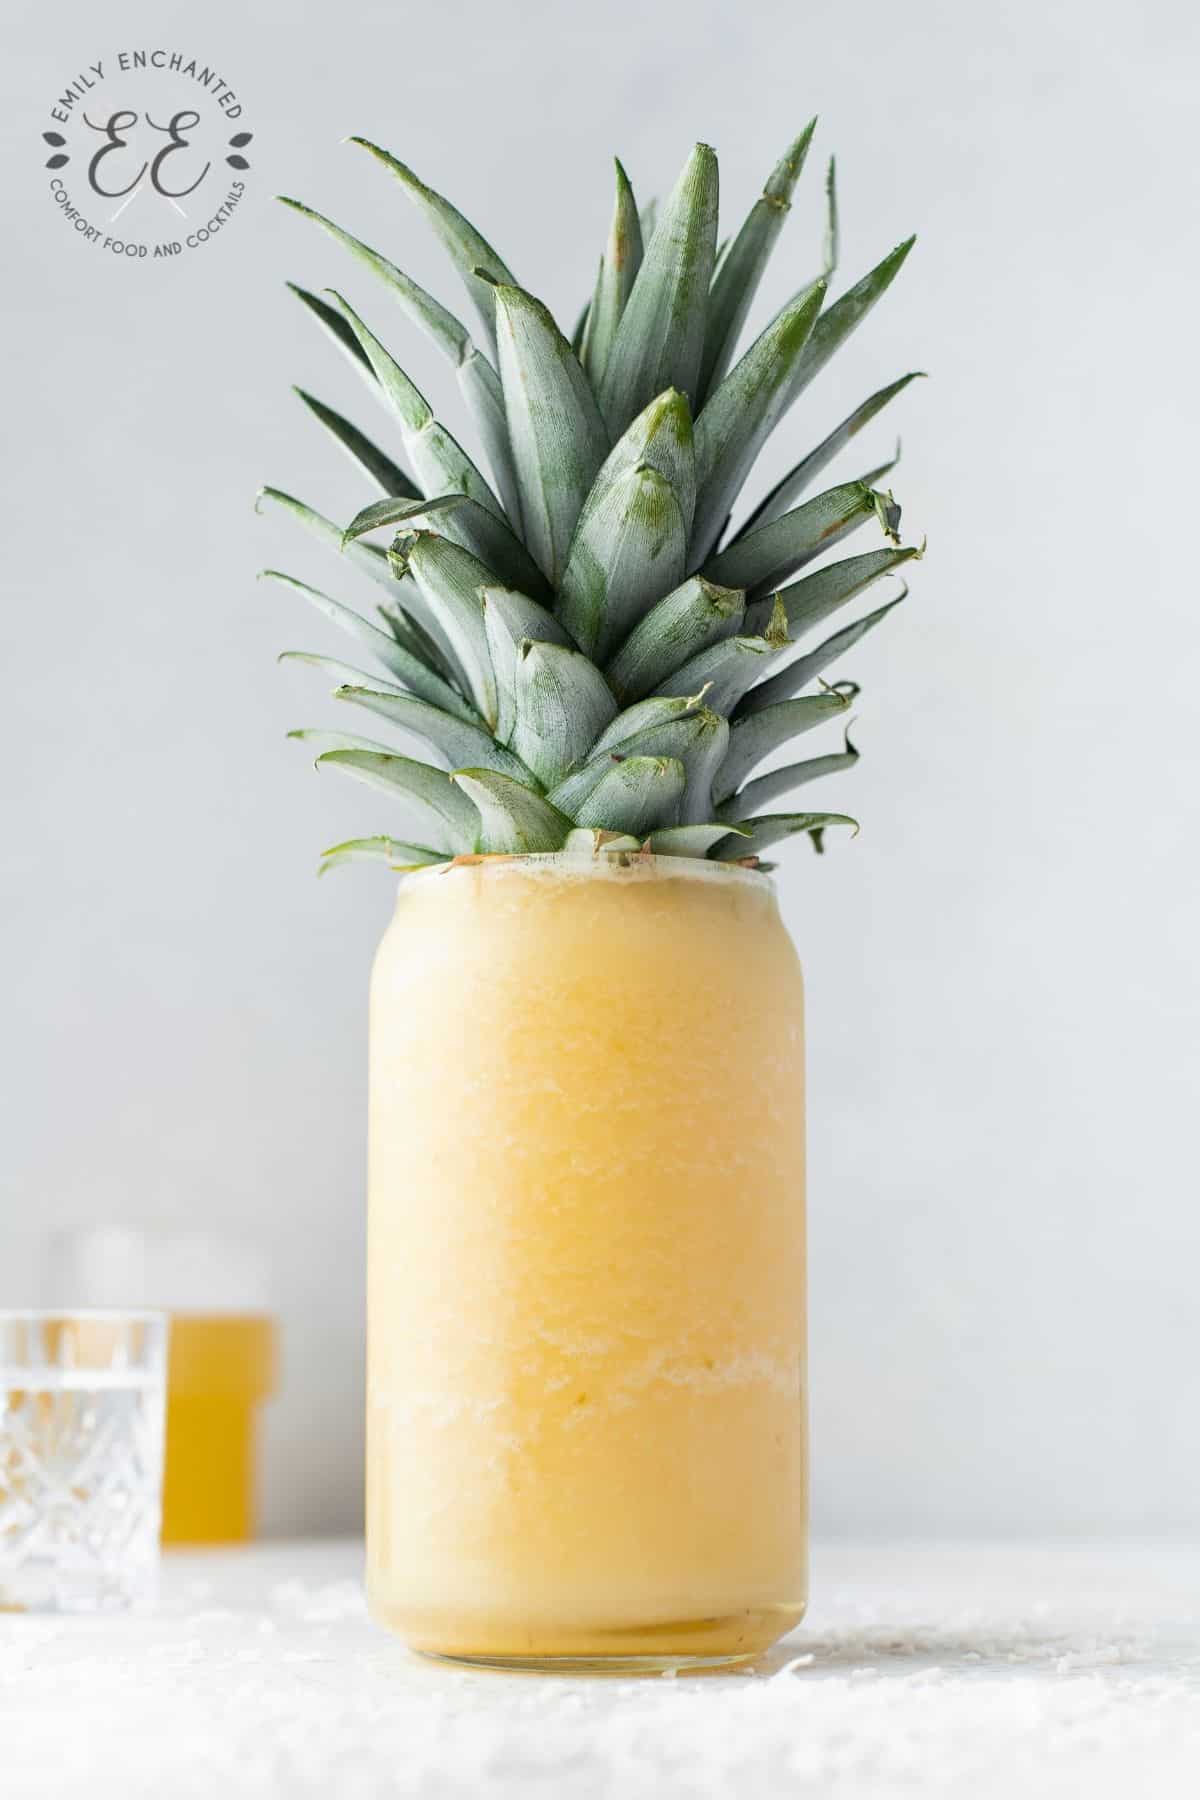 Frozen Piña Colada in a glass with the rosette of leaves as garnish